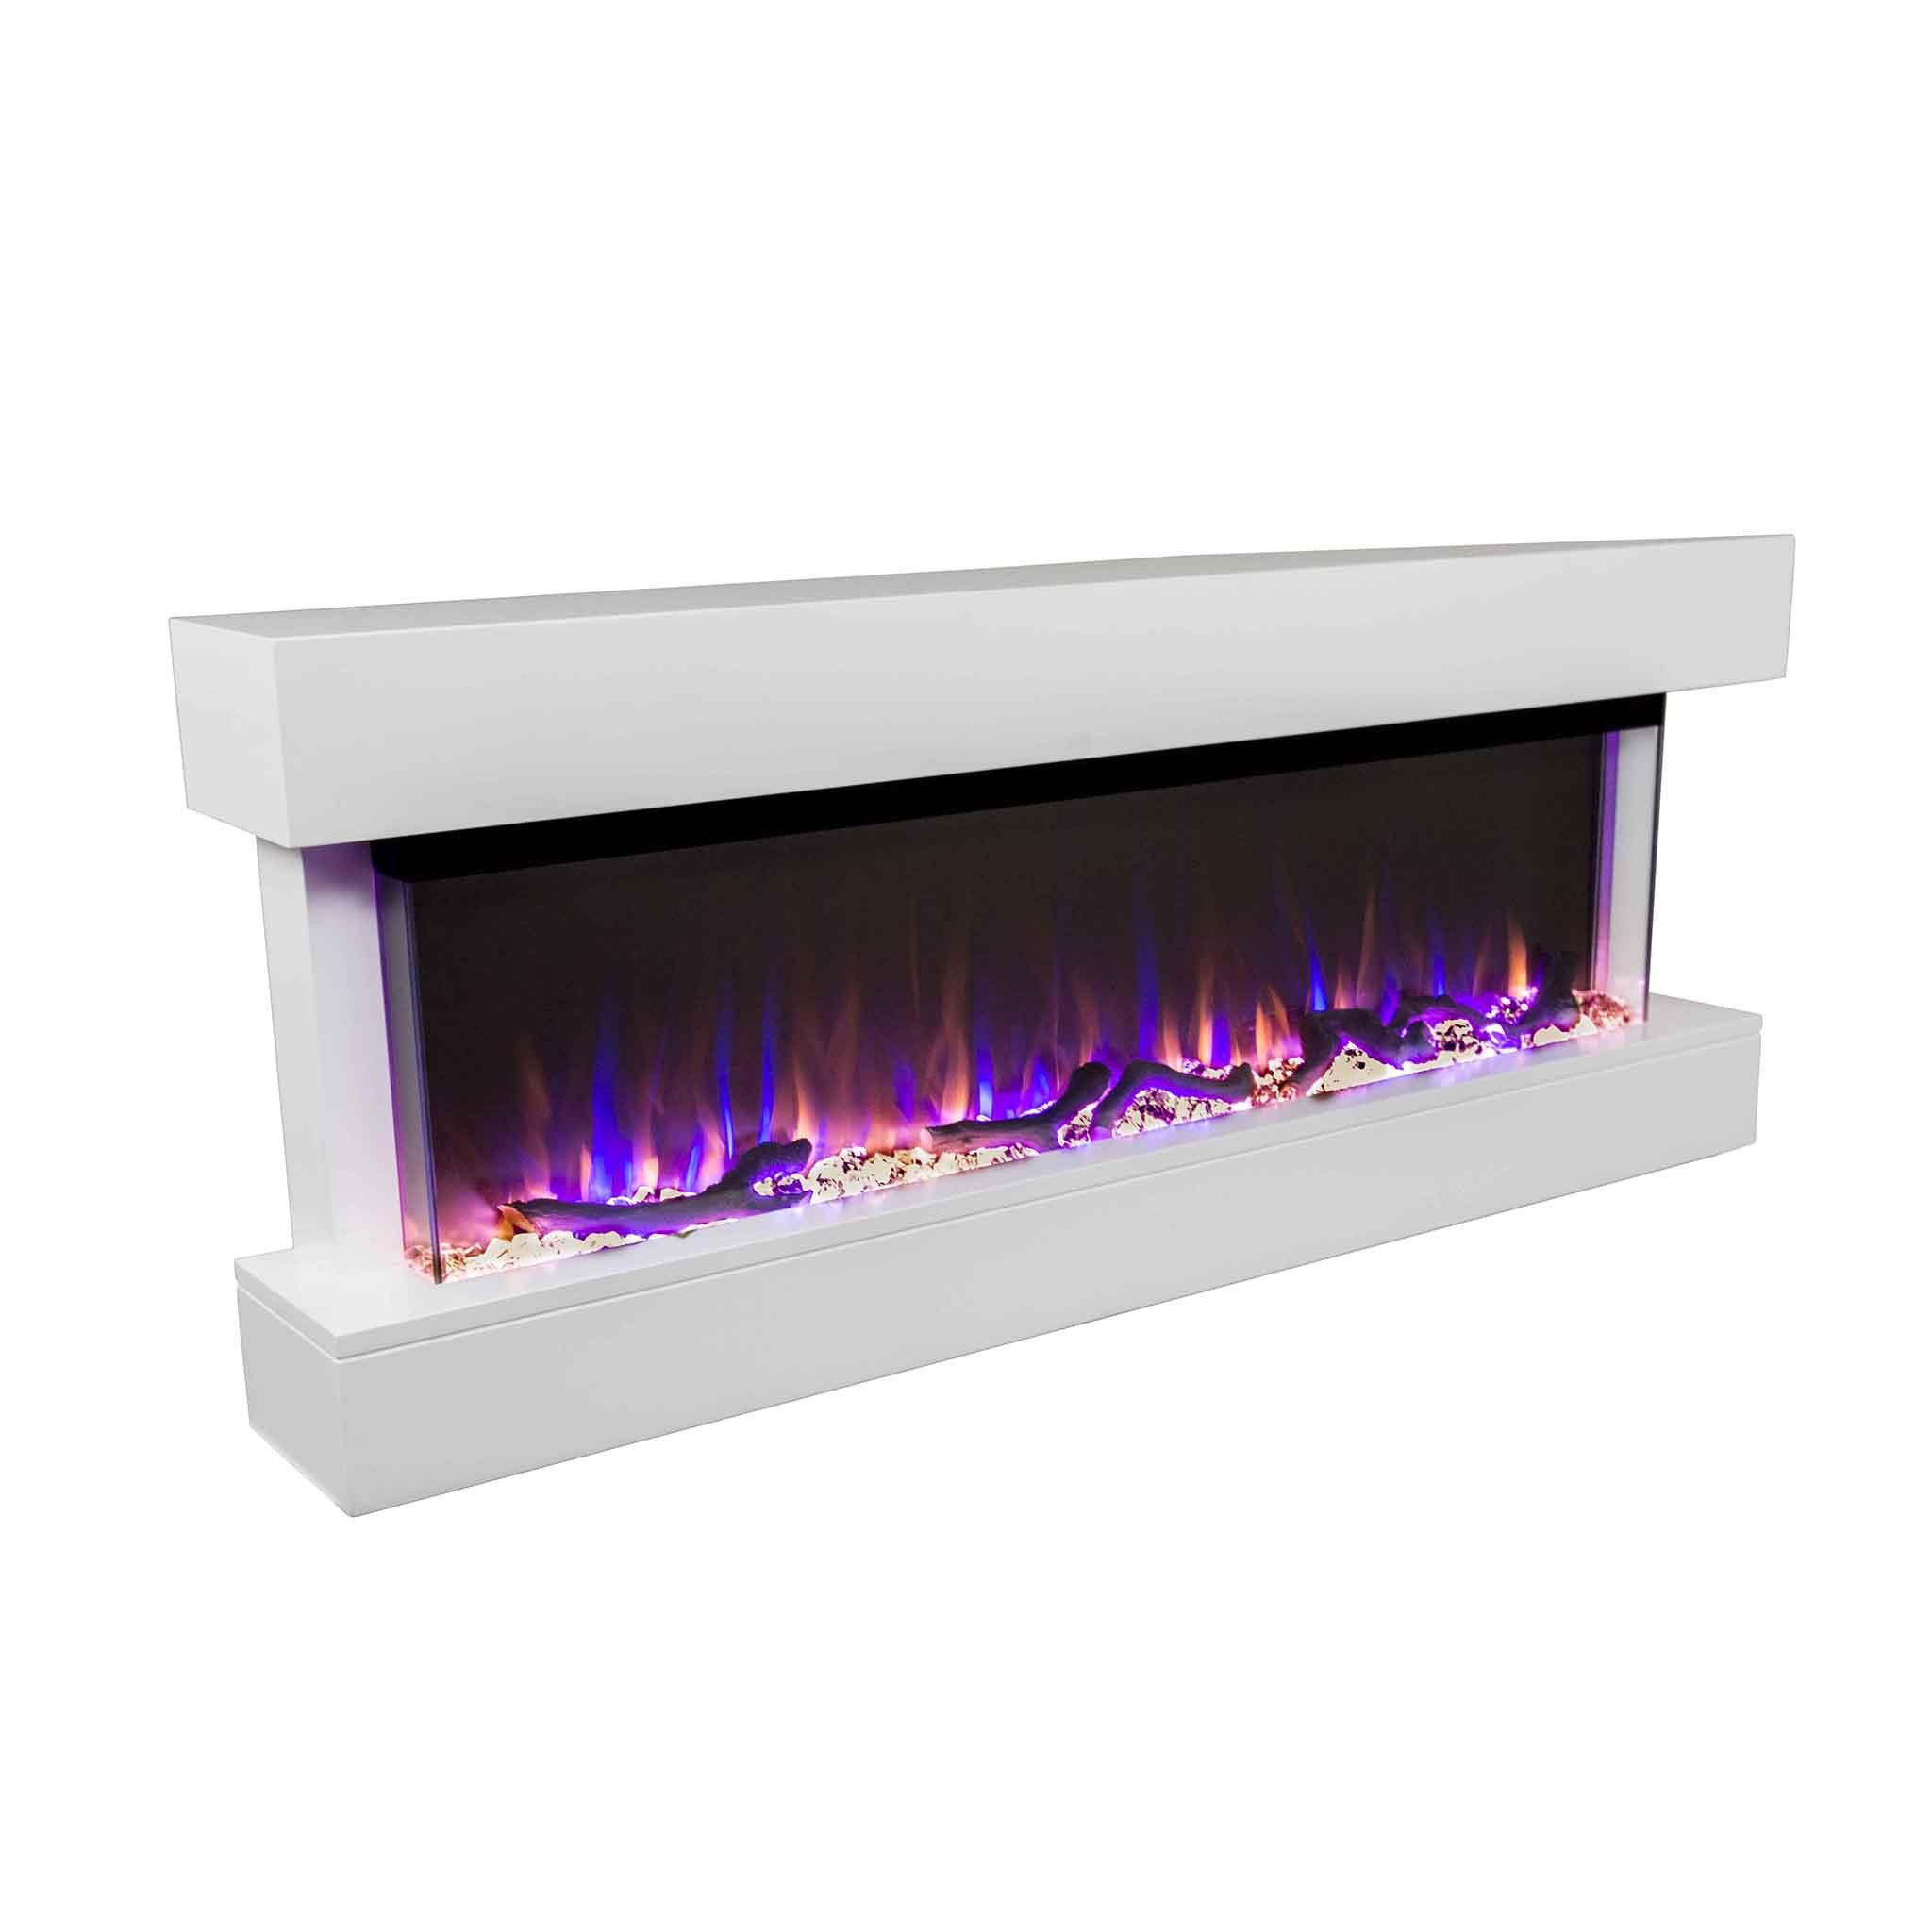 CTouchstone Chesmont Wall Mount Electric Fireplace in white on angle